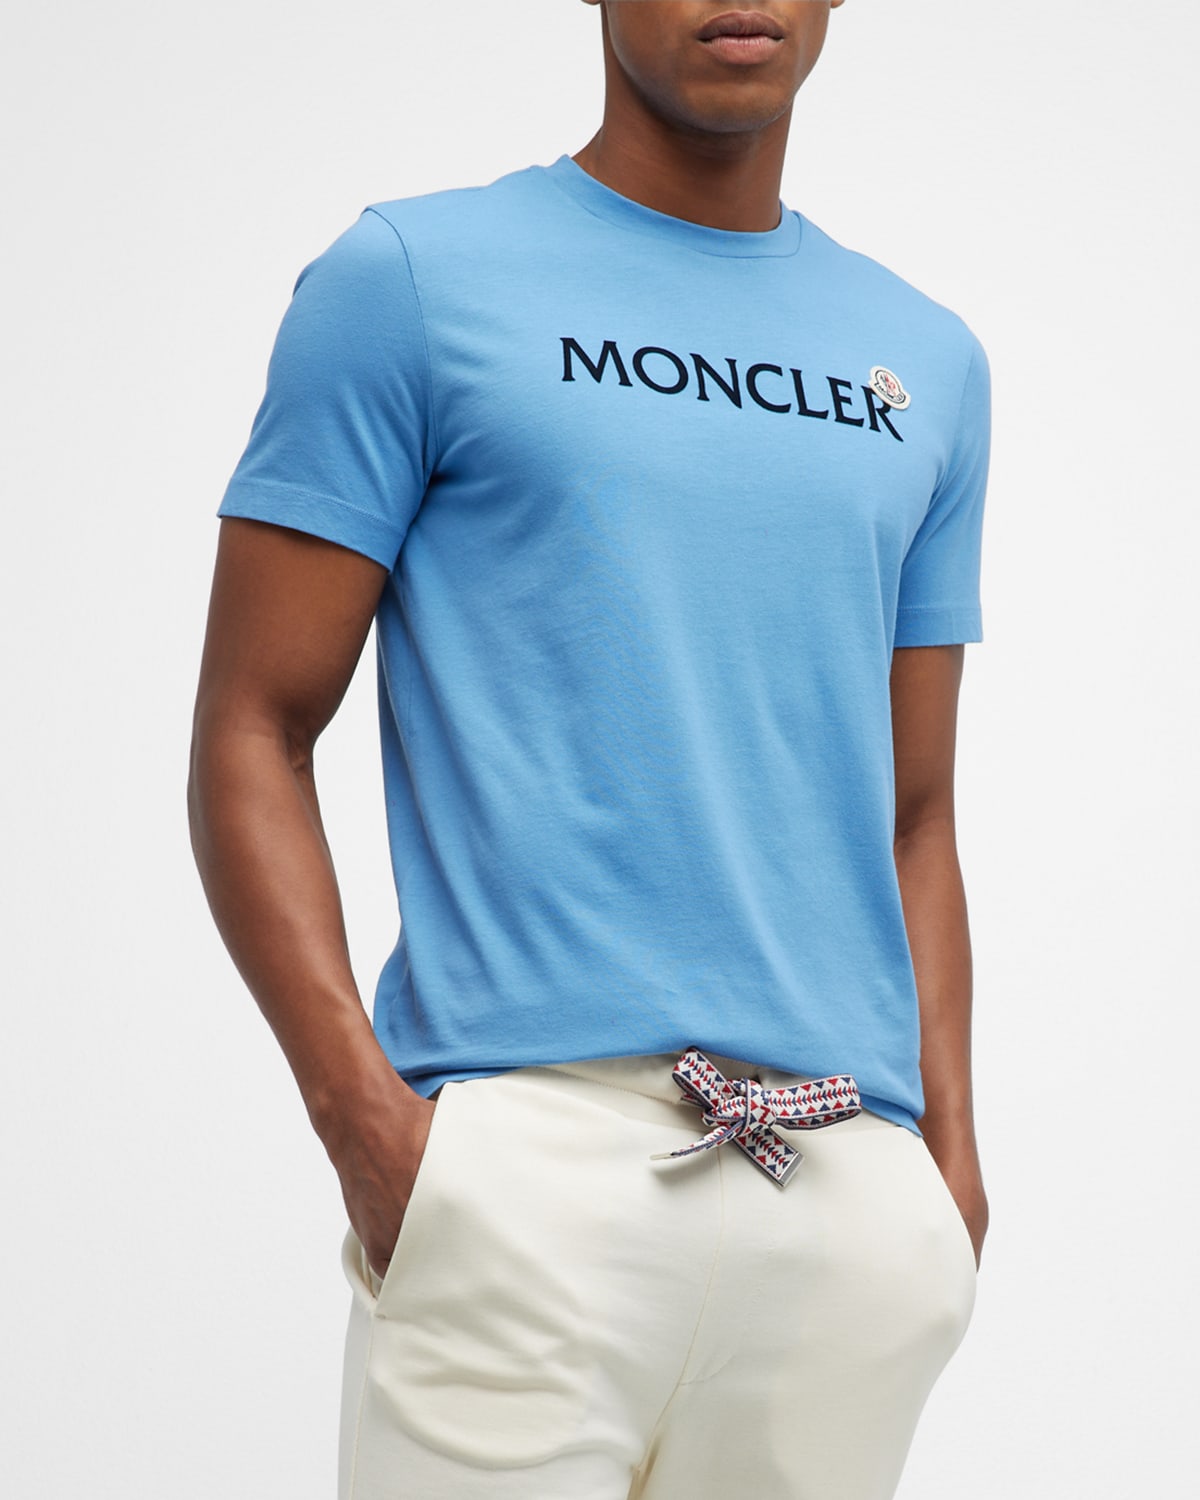 Complex Wasserette kortademigheid Moncler Men's Logo T-shirt With Patch In Turquoise | ModeSens